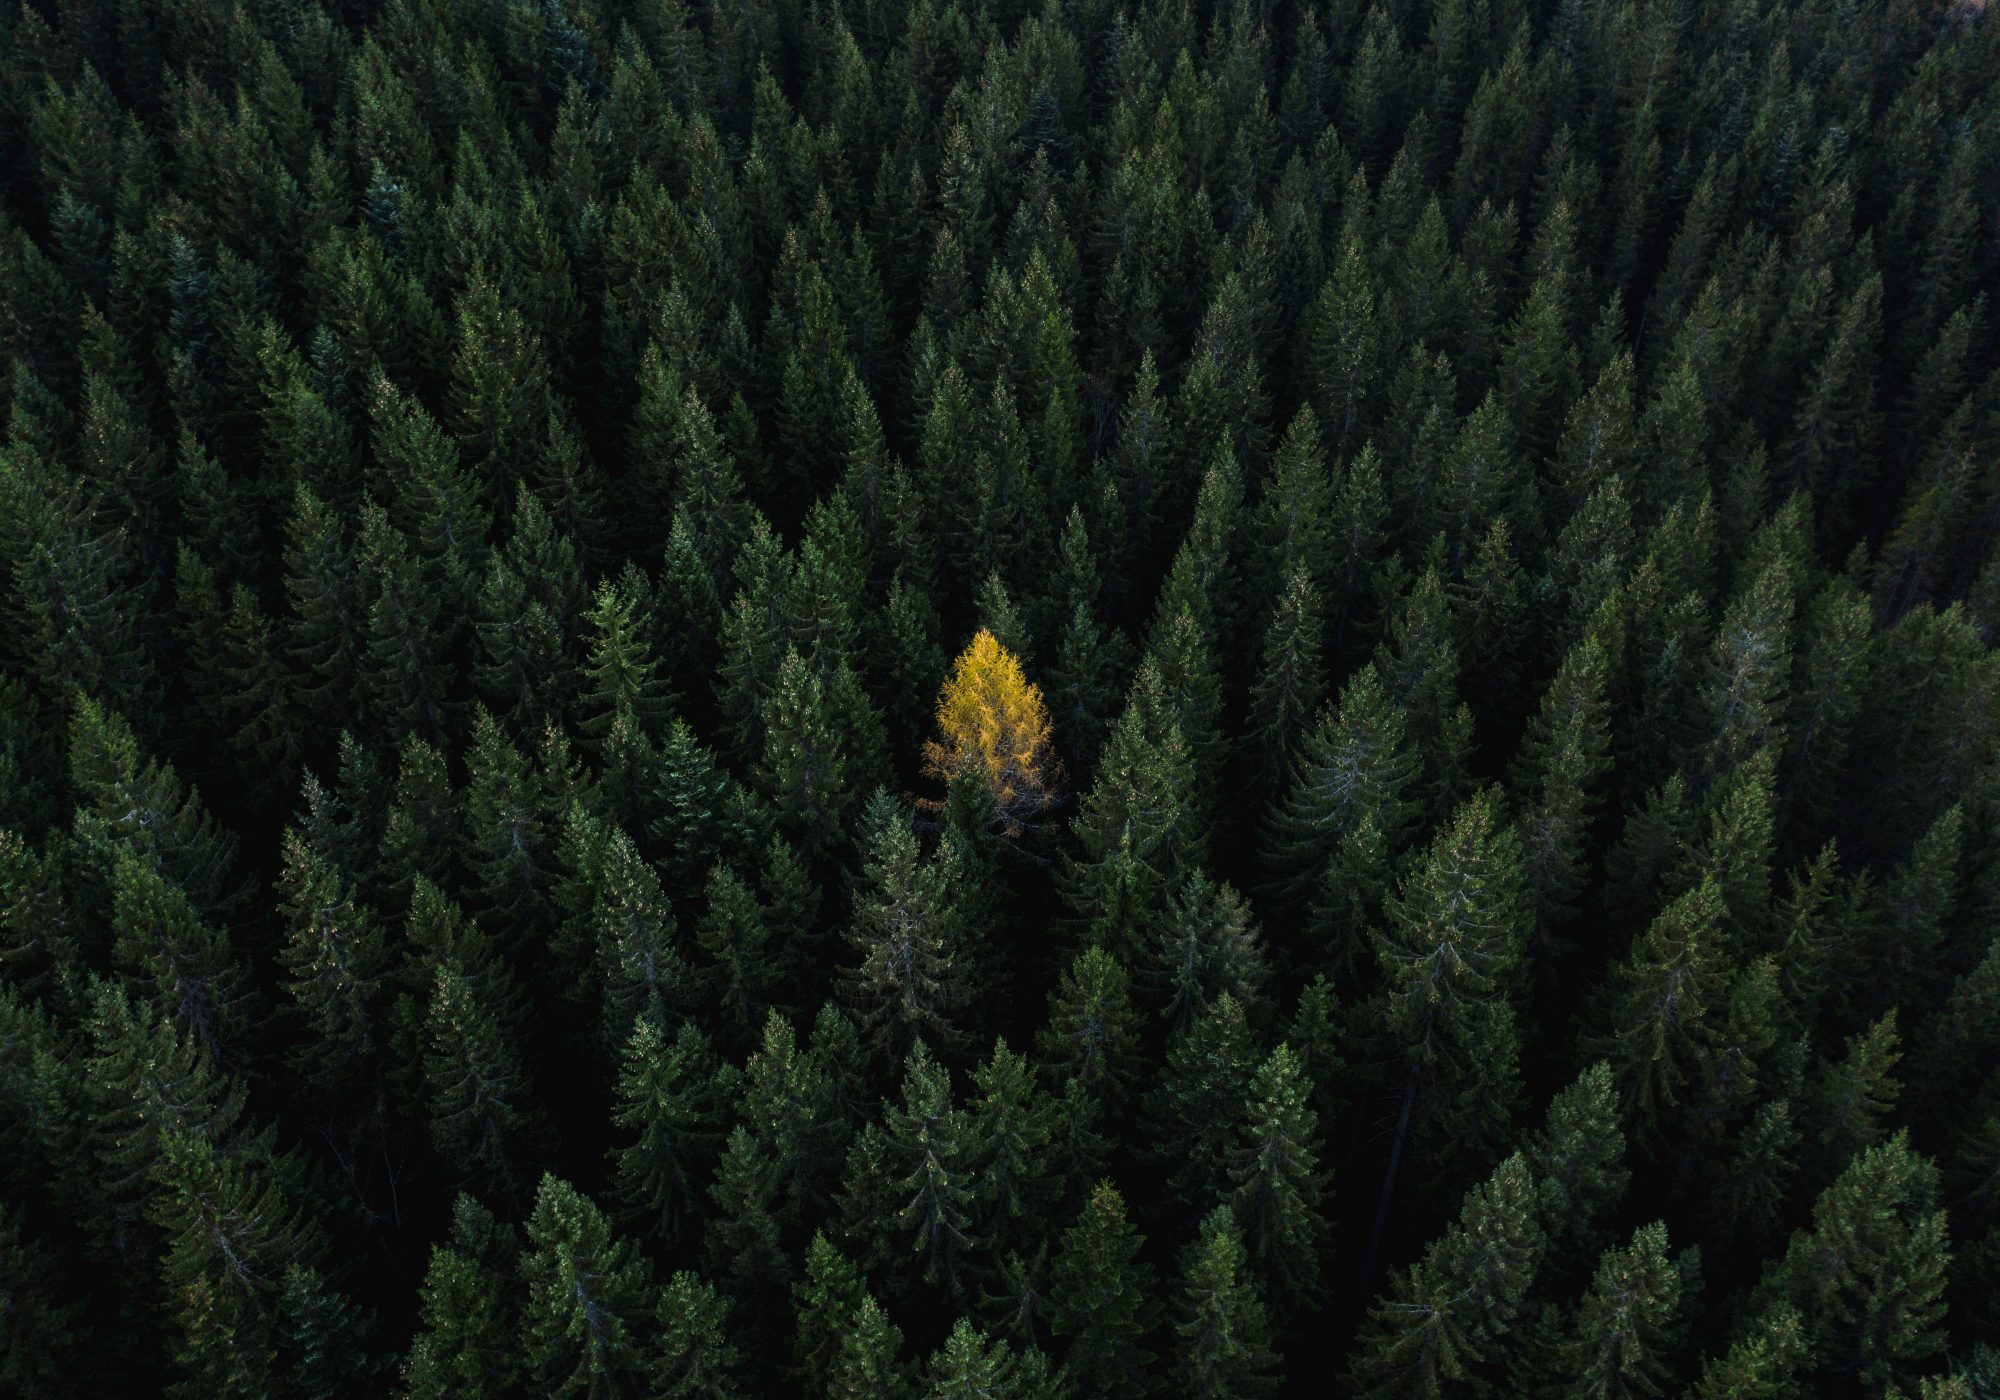 Single yellow tree in a forest of green trees